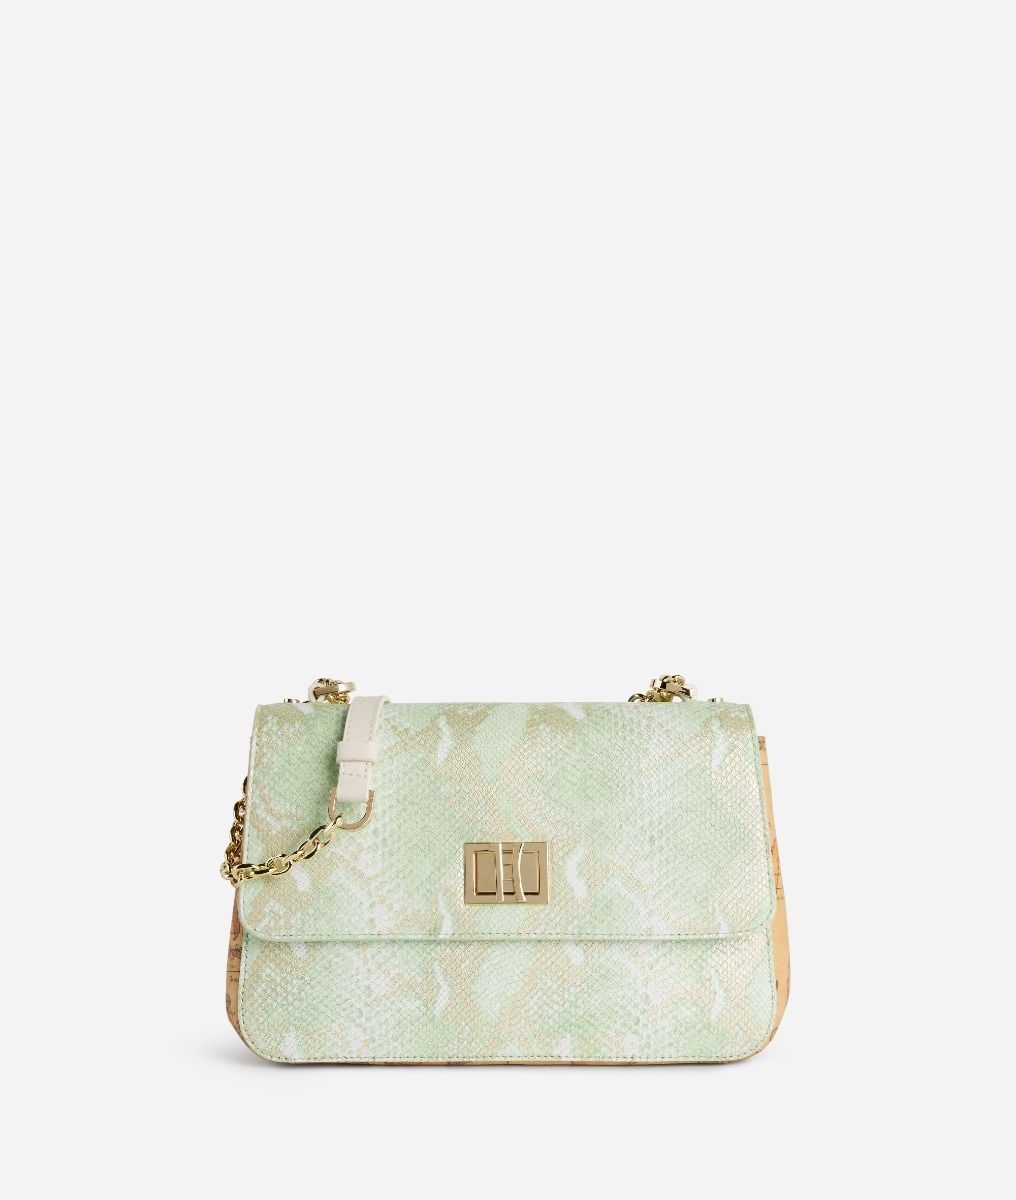 Lovely Bag with shoulder strap in printed leather Milk Mint,front